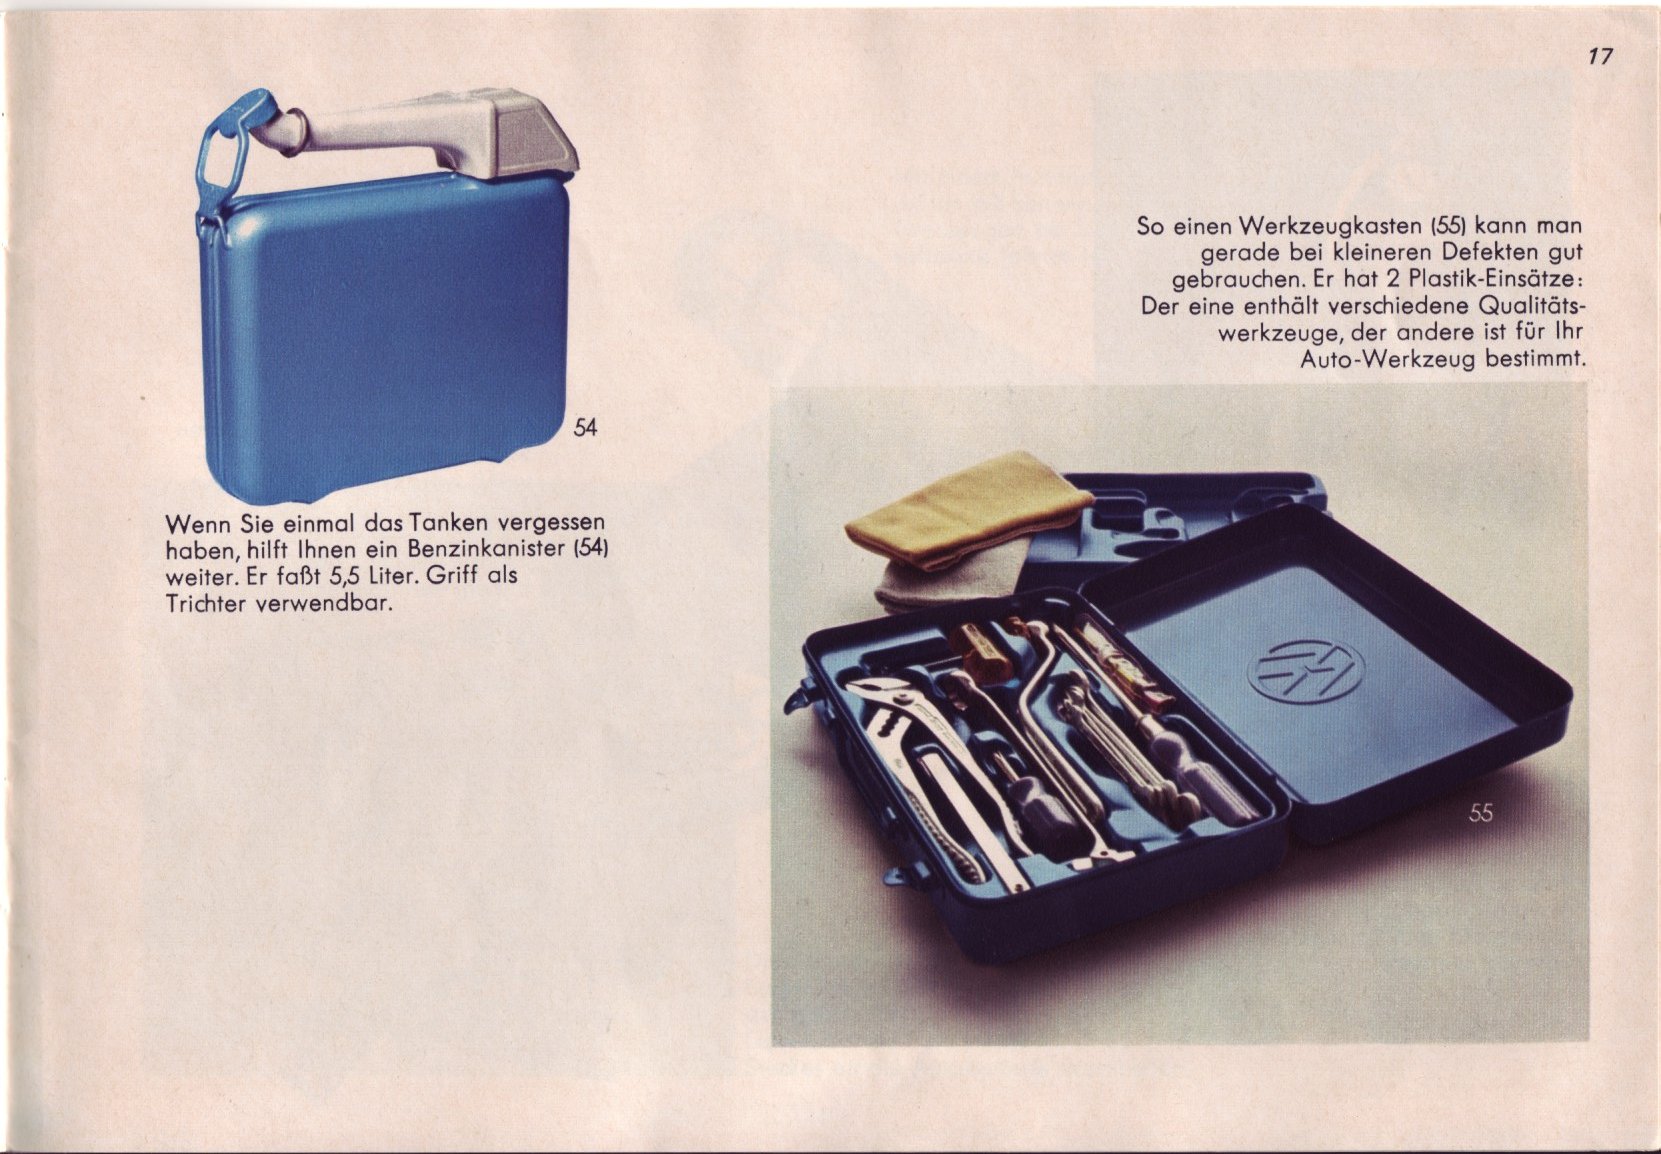  VW Archives - October, 1968 Accessories - German